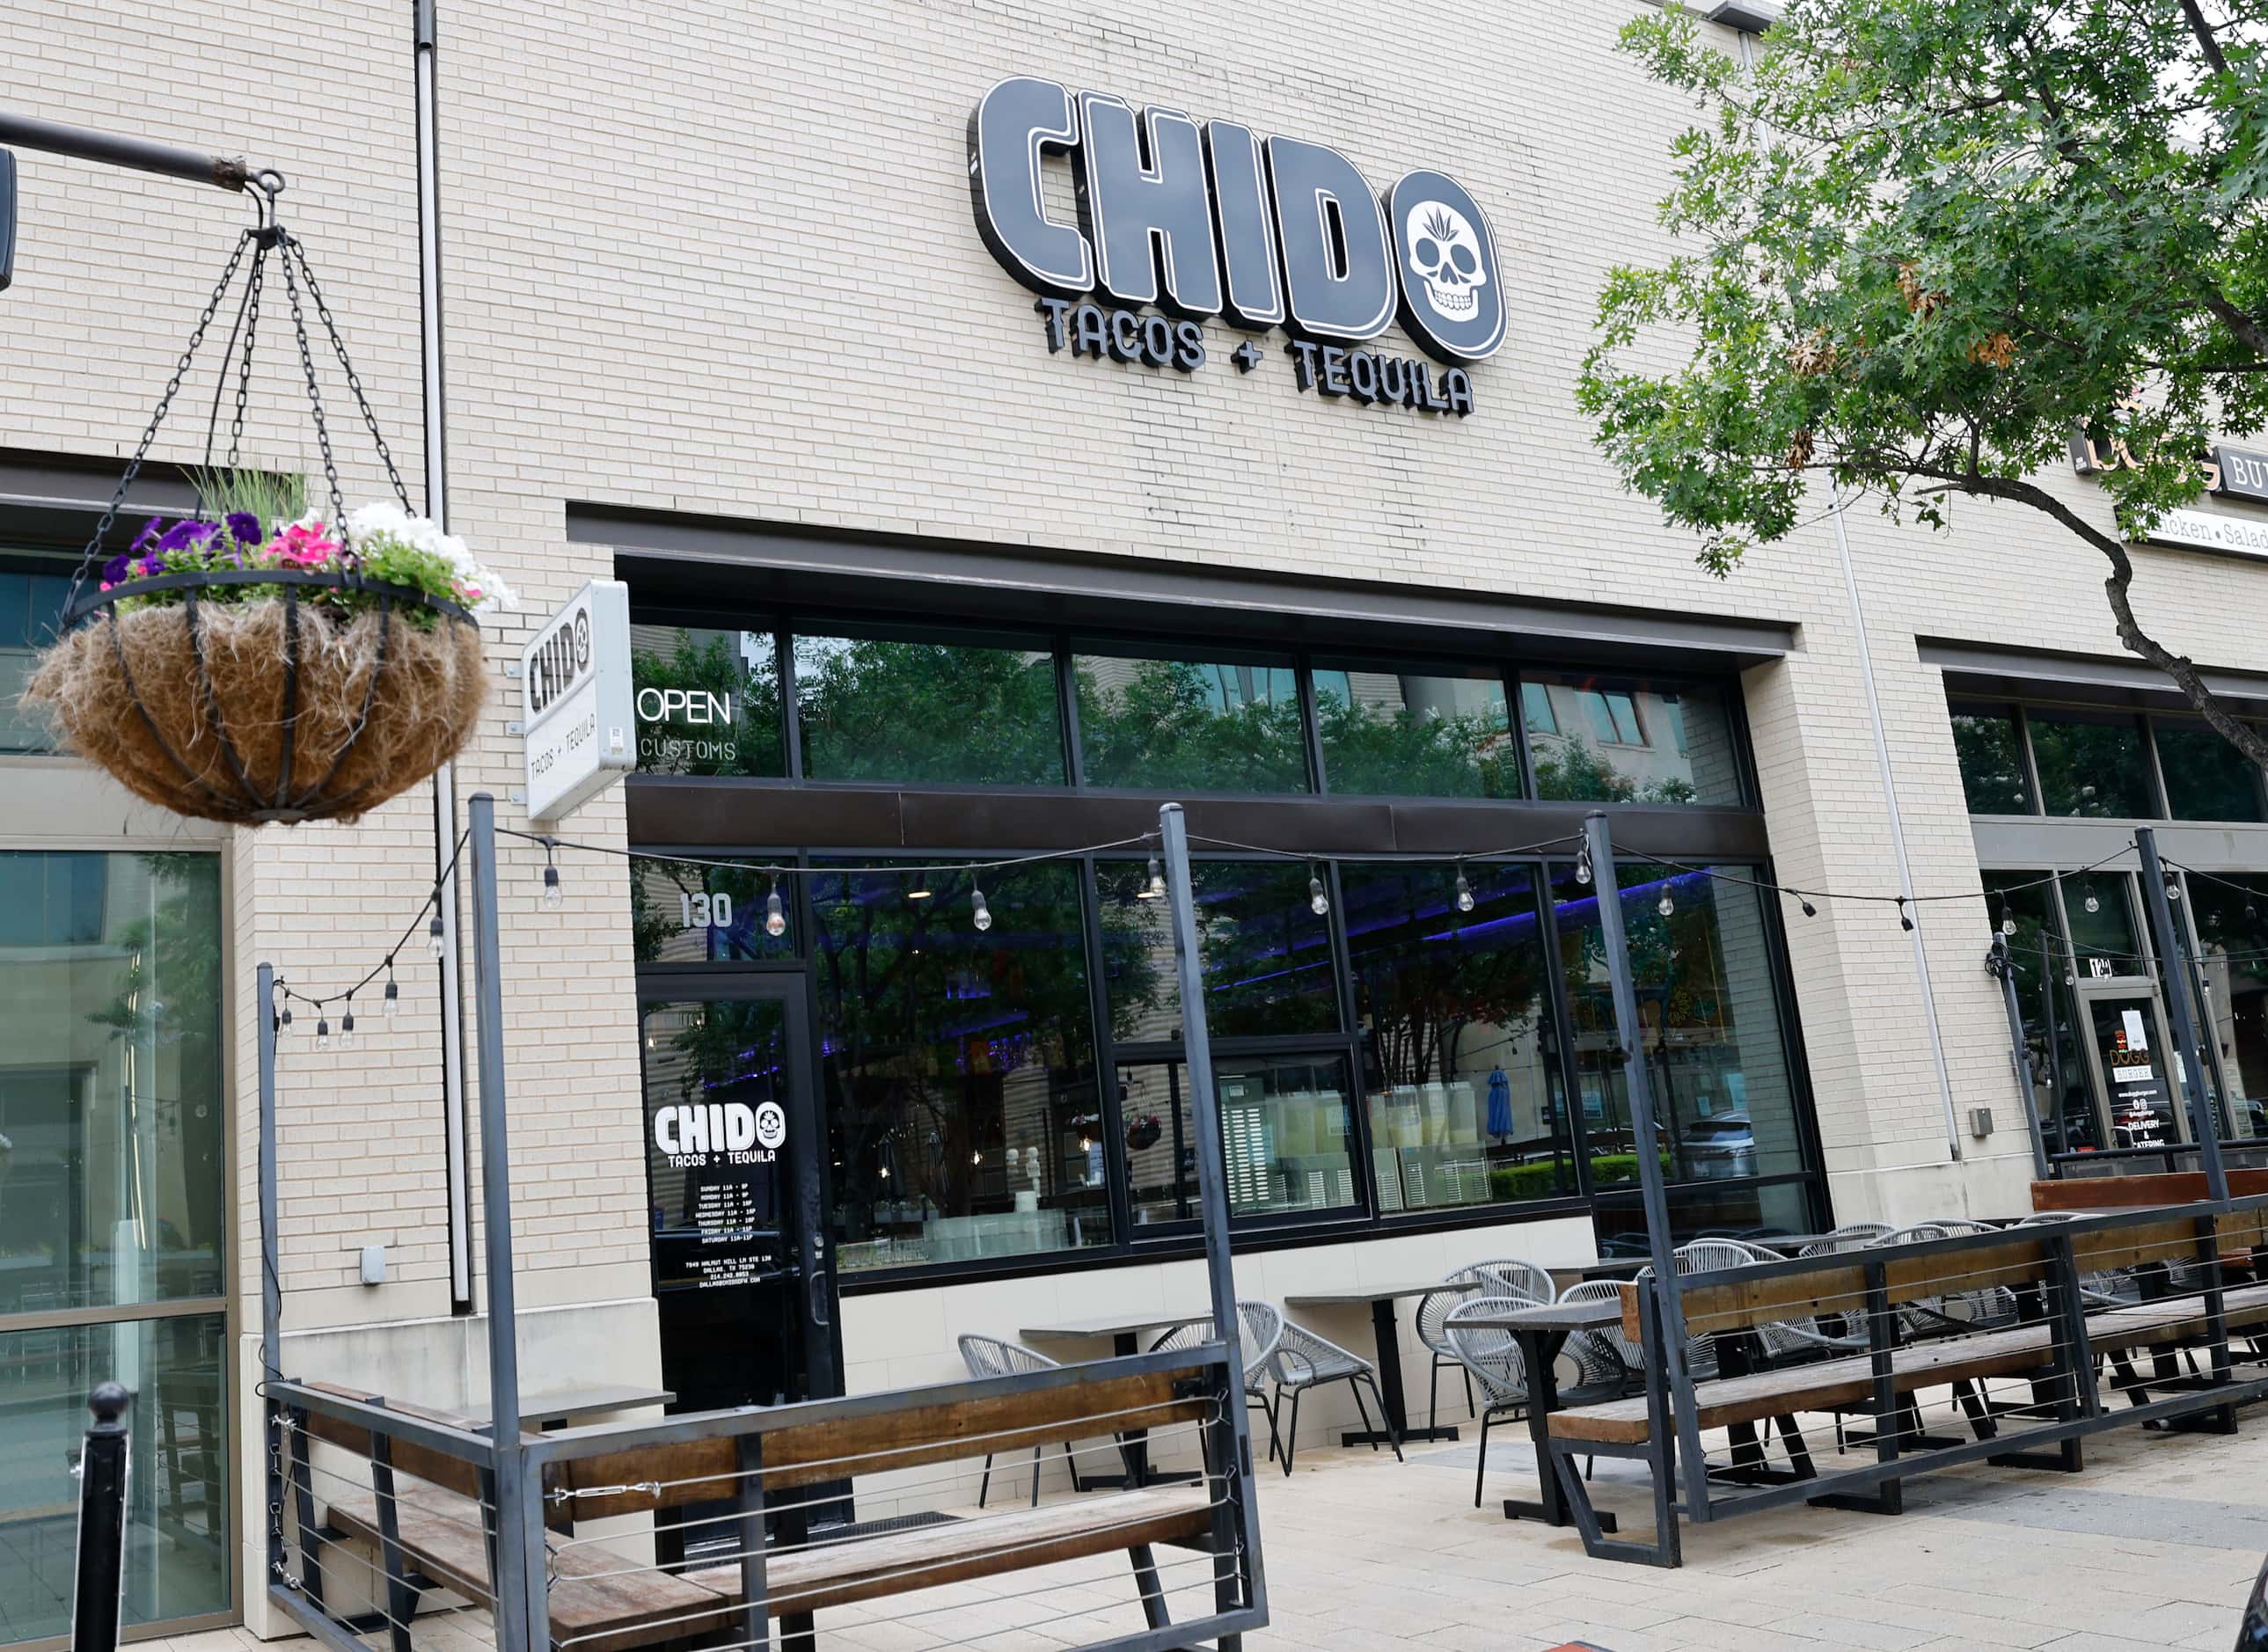 The exterior of Chido Tacos and Tequila is seen in Preston Hollow Village. Trader Joe's is...